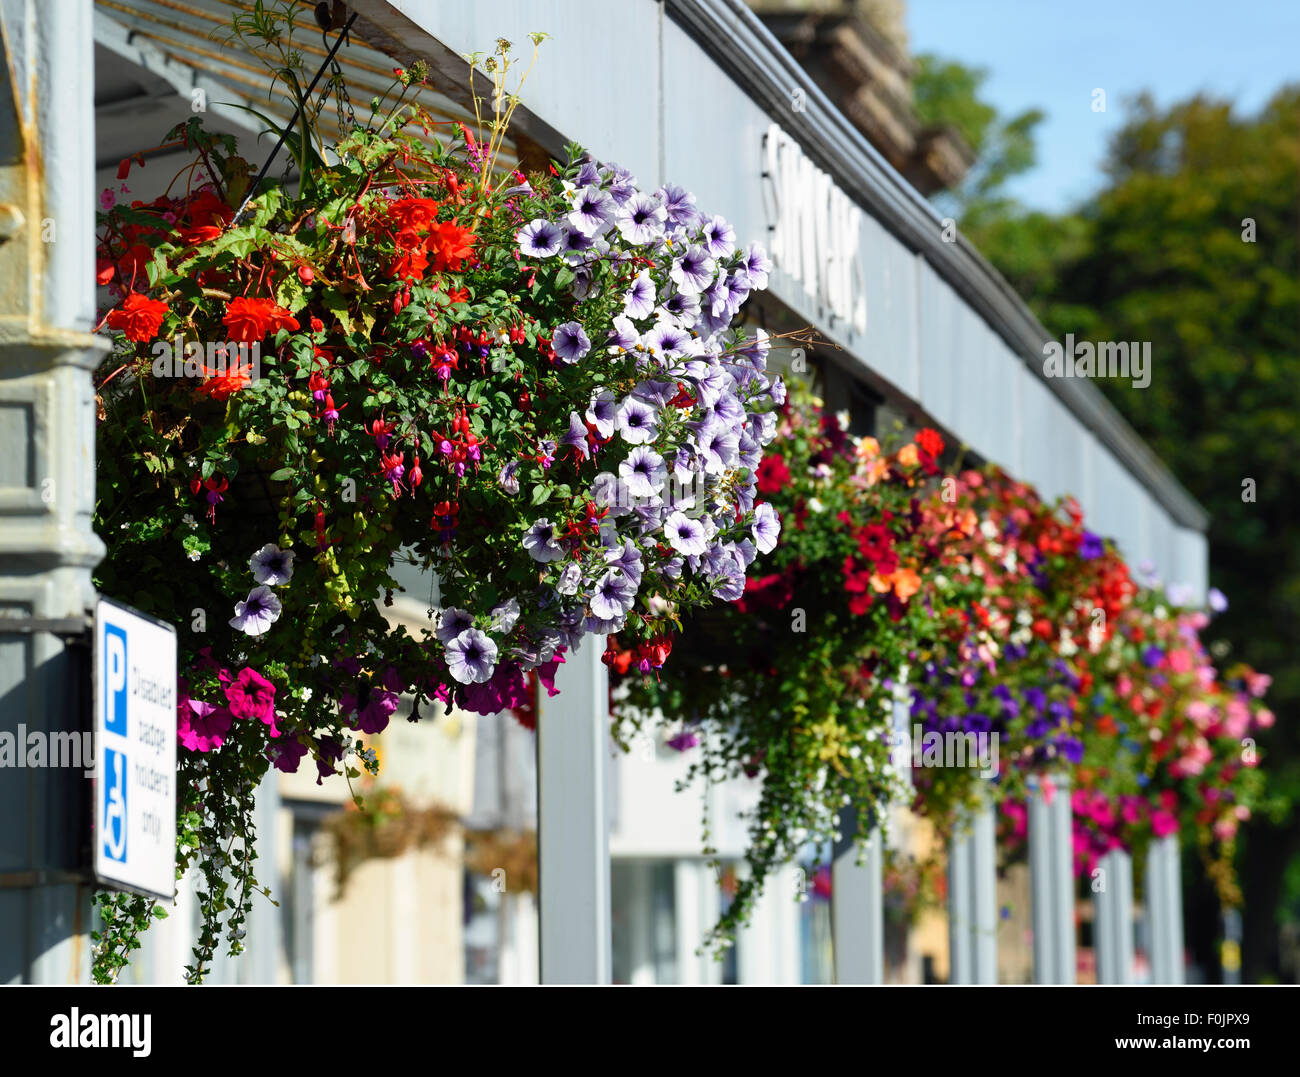 Row of colourful hanging baskets outside a shop in Lytham, Lancashire Stock Photo